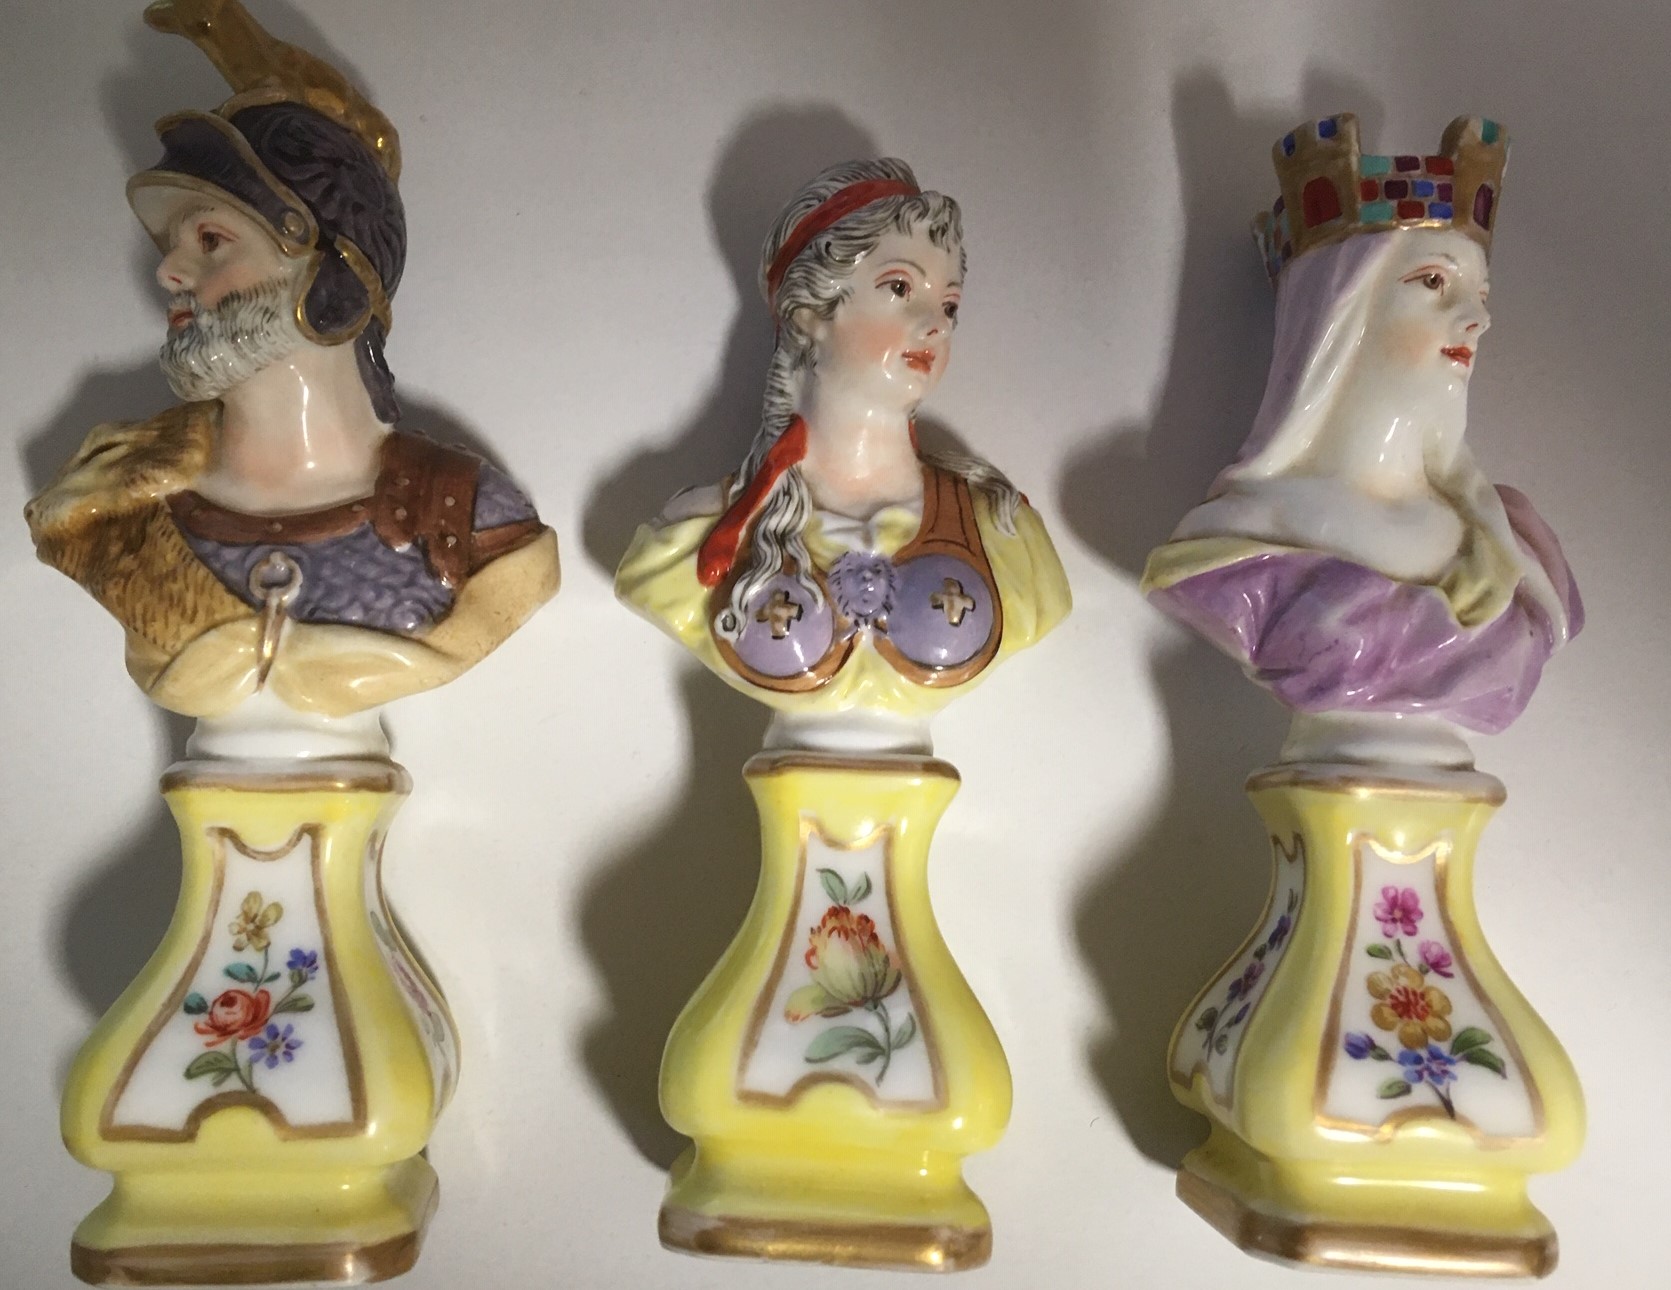 THREE 19TH CENTURY KPM BERLIN PORCELAIN BUSTS modelled as 'Mars', 'Bellona' and 'Cybele', polychrome - Image 9 of 9